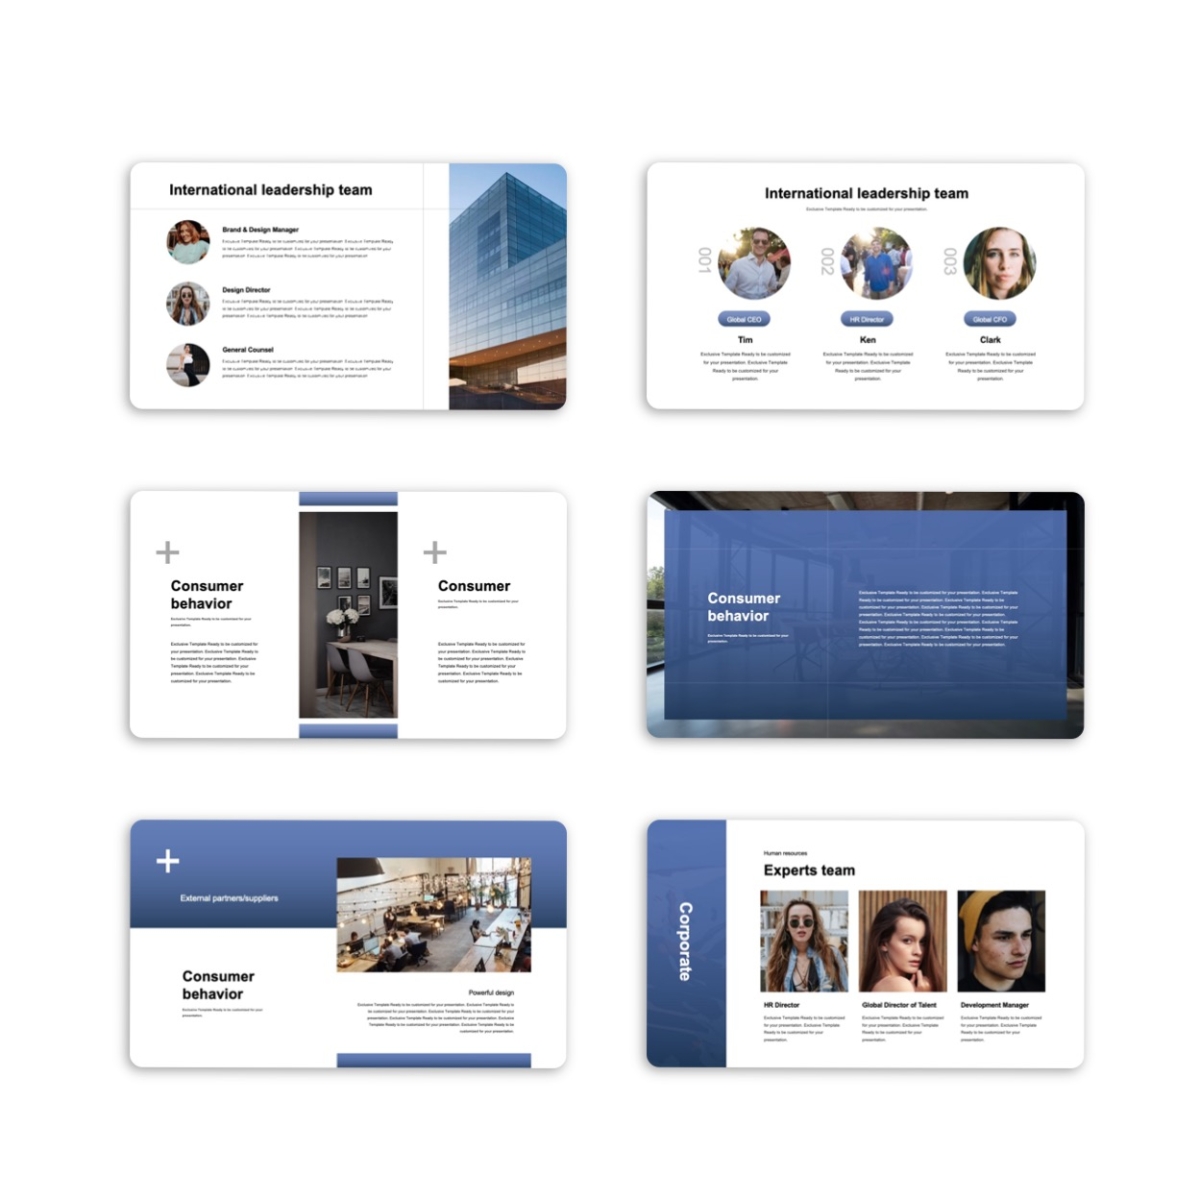 Clean Simple Corporate PowerPoint Template